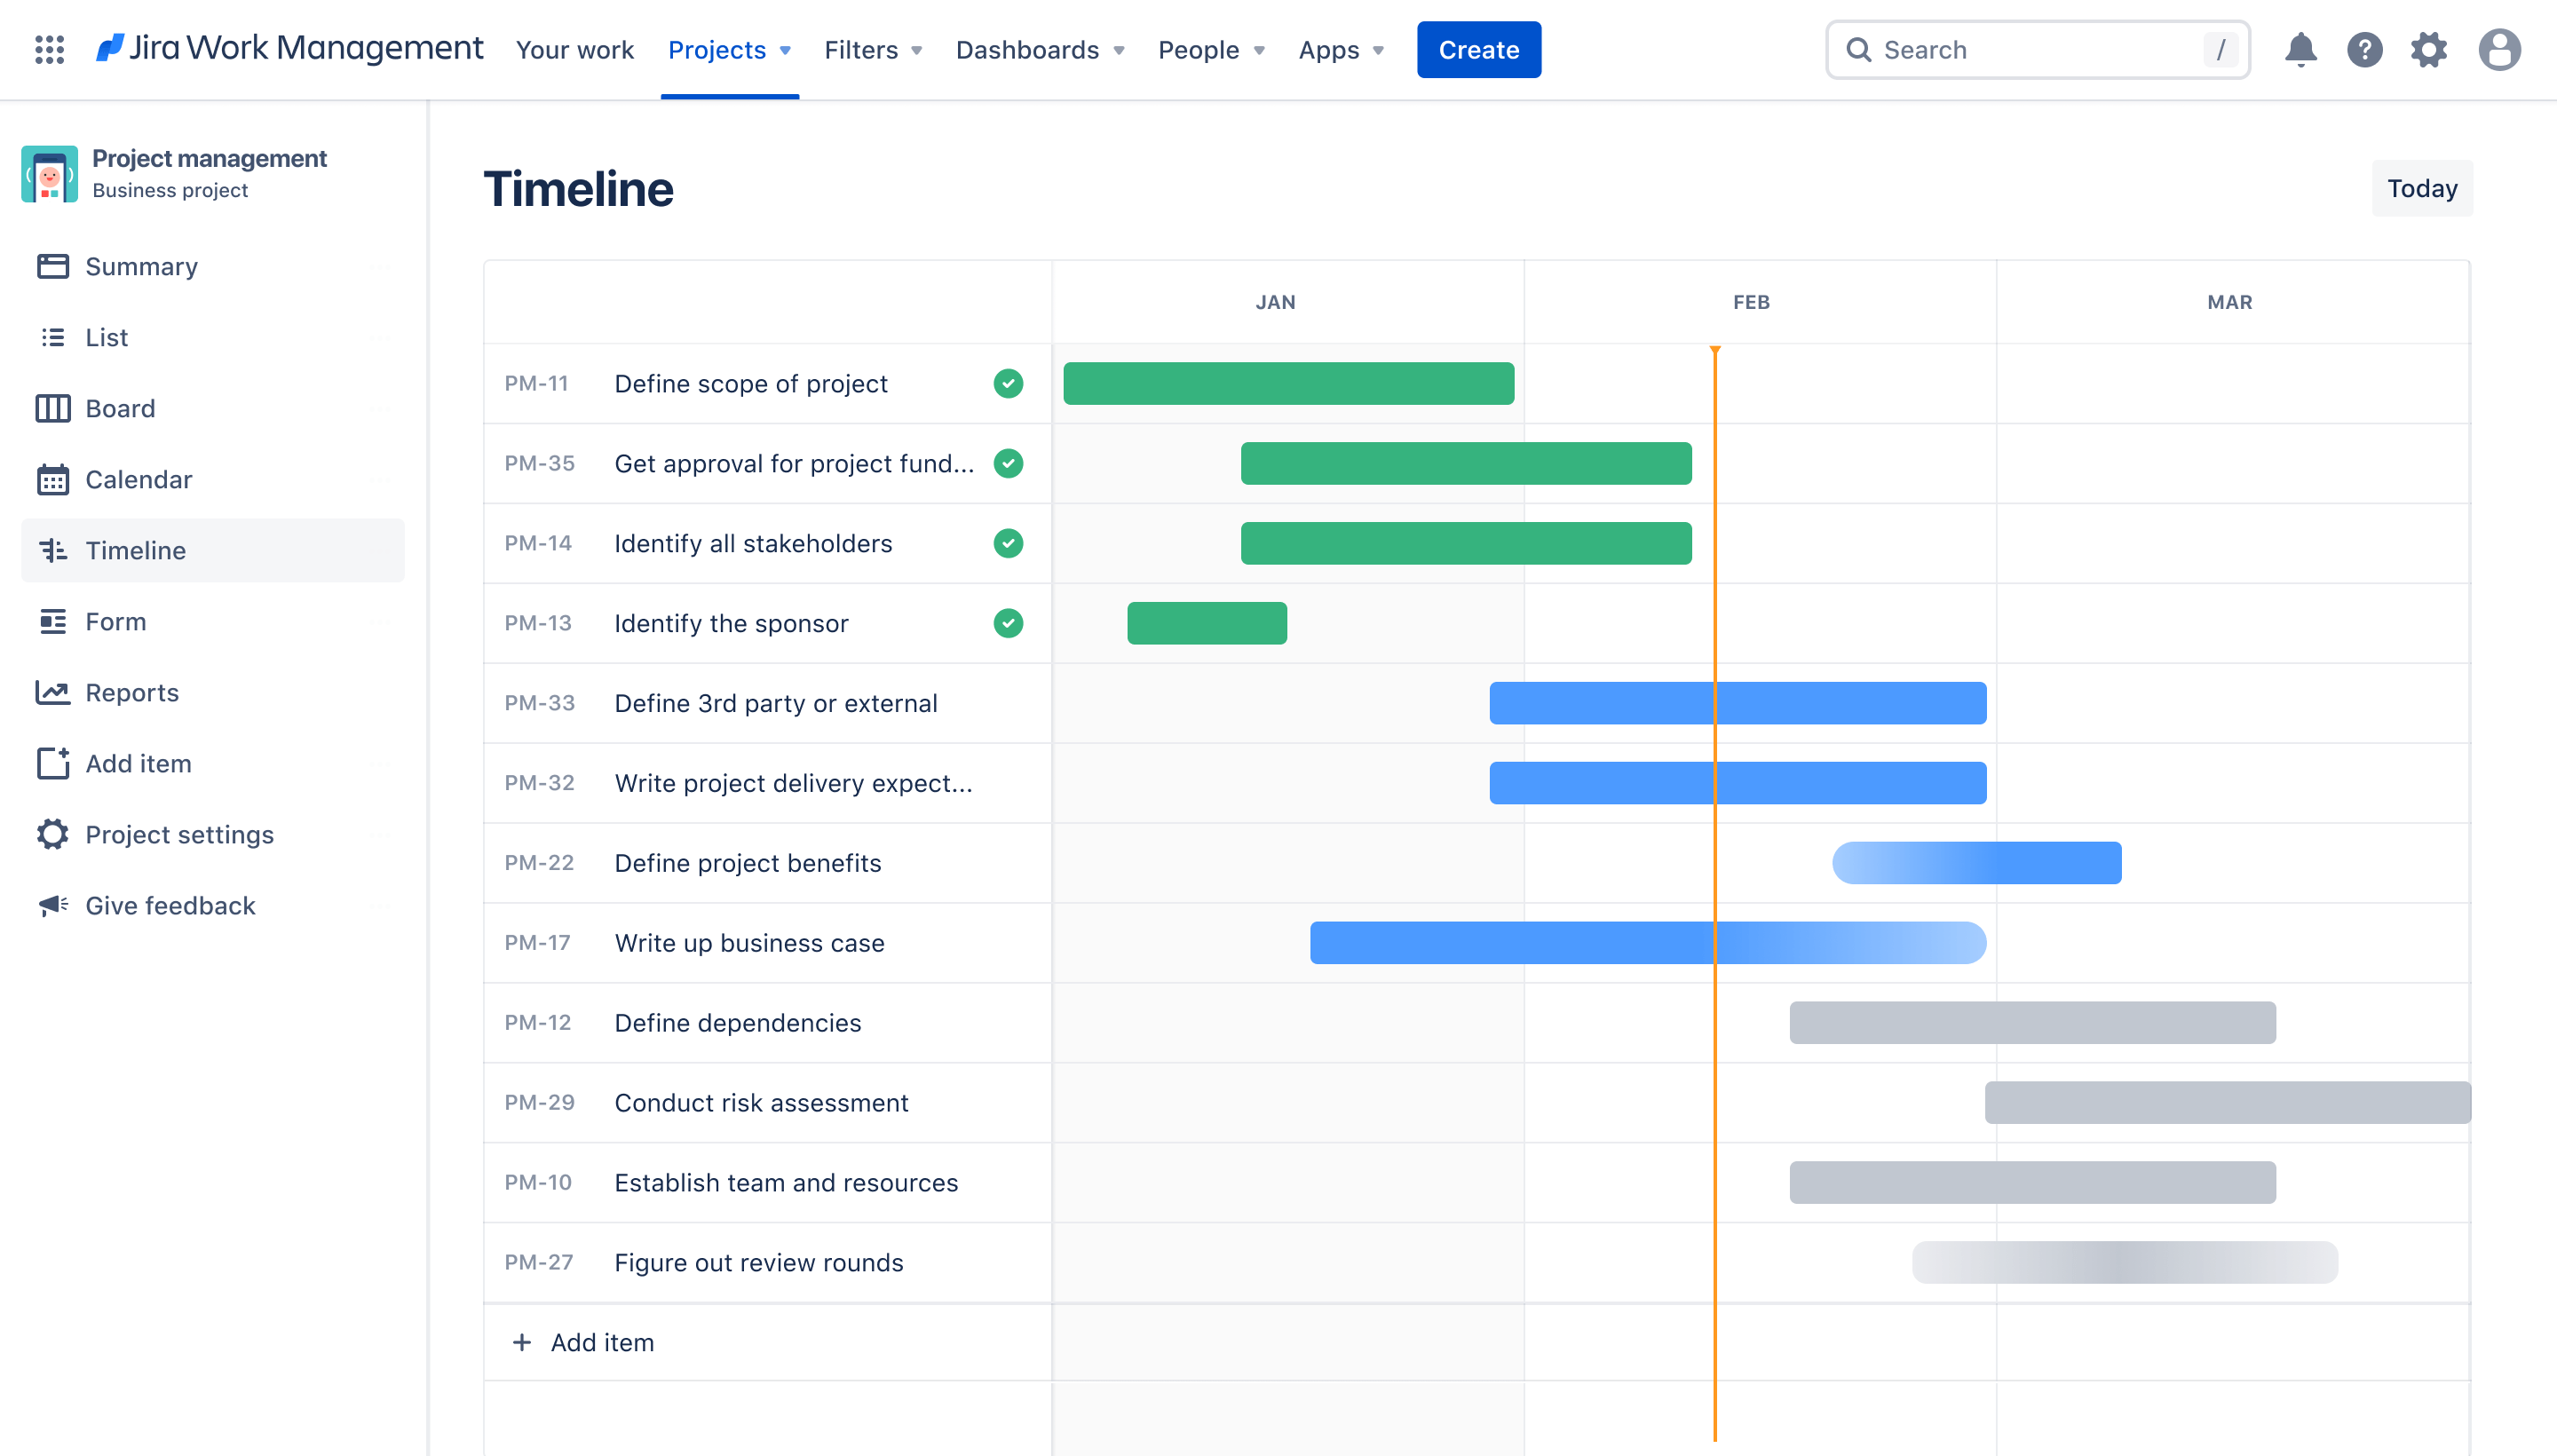 Project management timeline view on Jira Work Management, Jira software